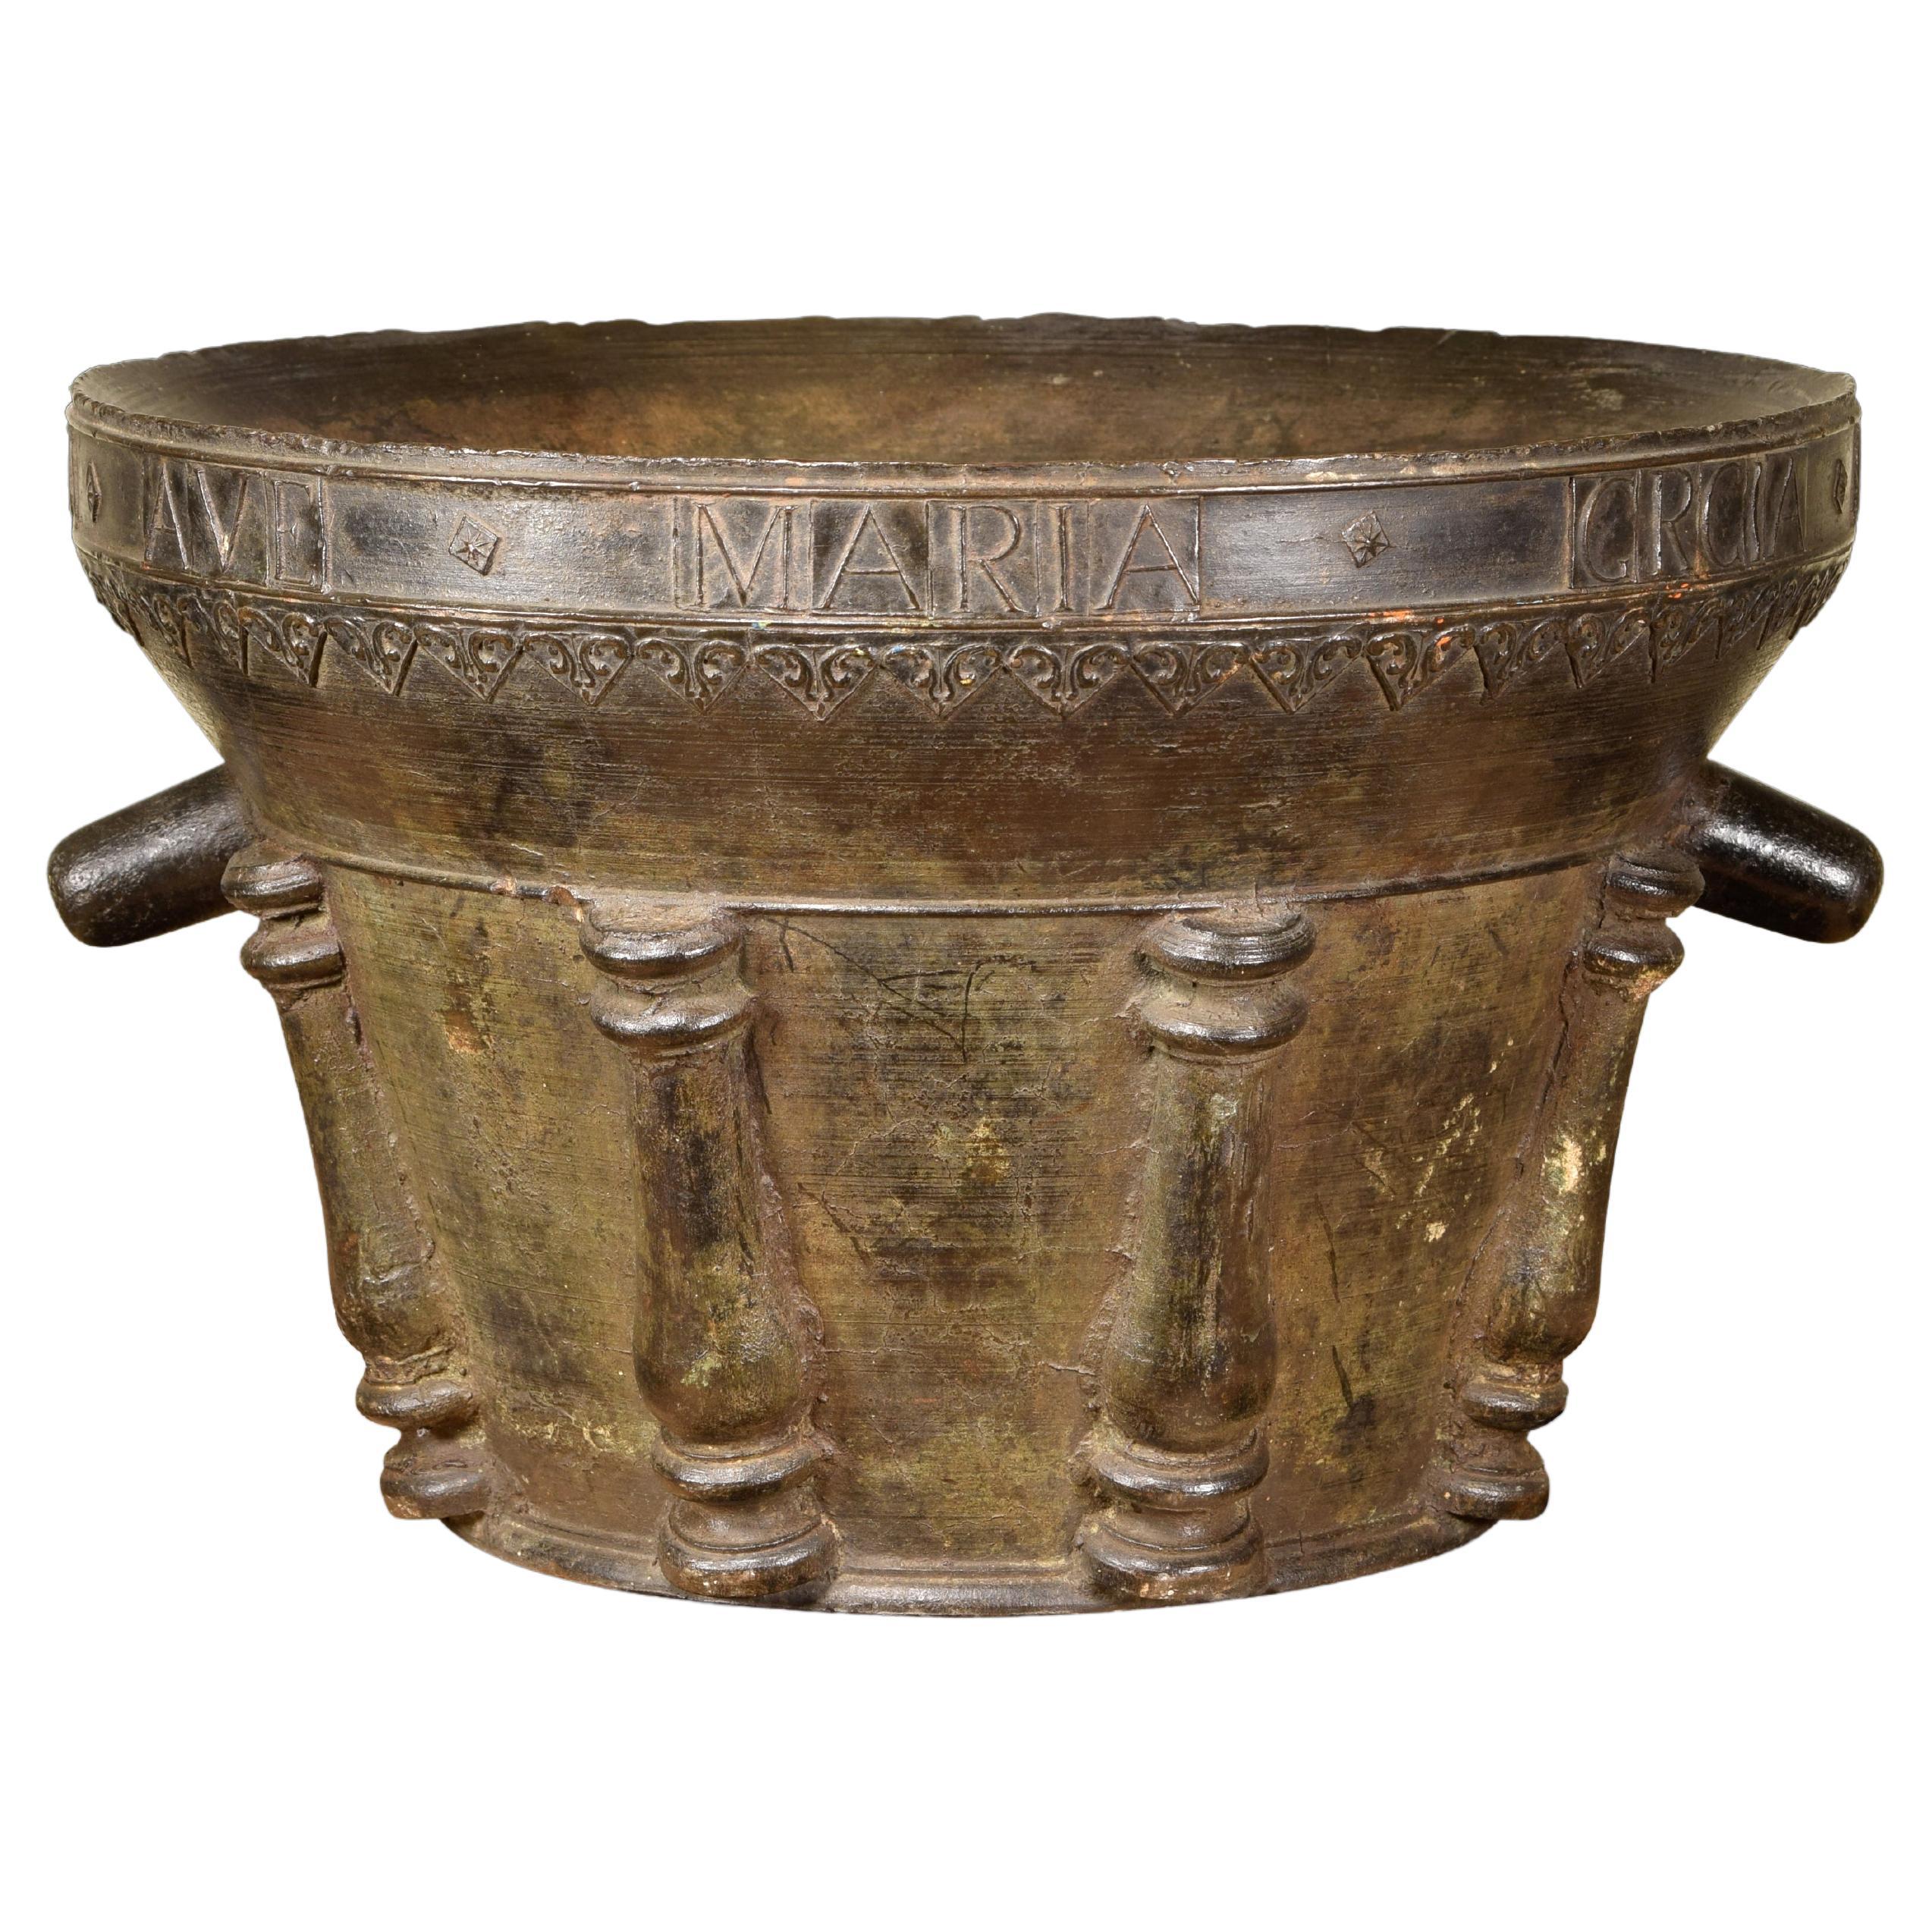 Pharmacy mortar. Bronze. Spain, dated in the piece in 1743. 